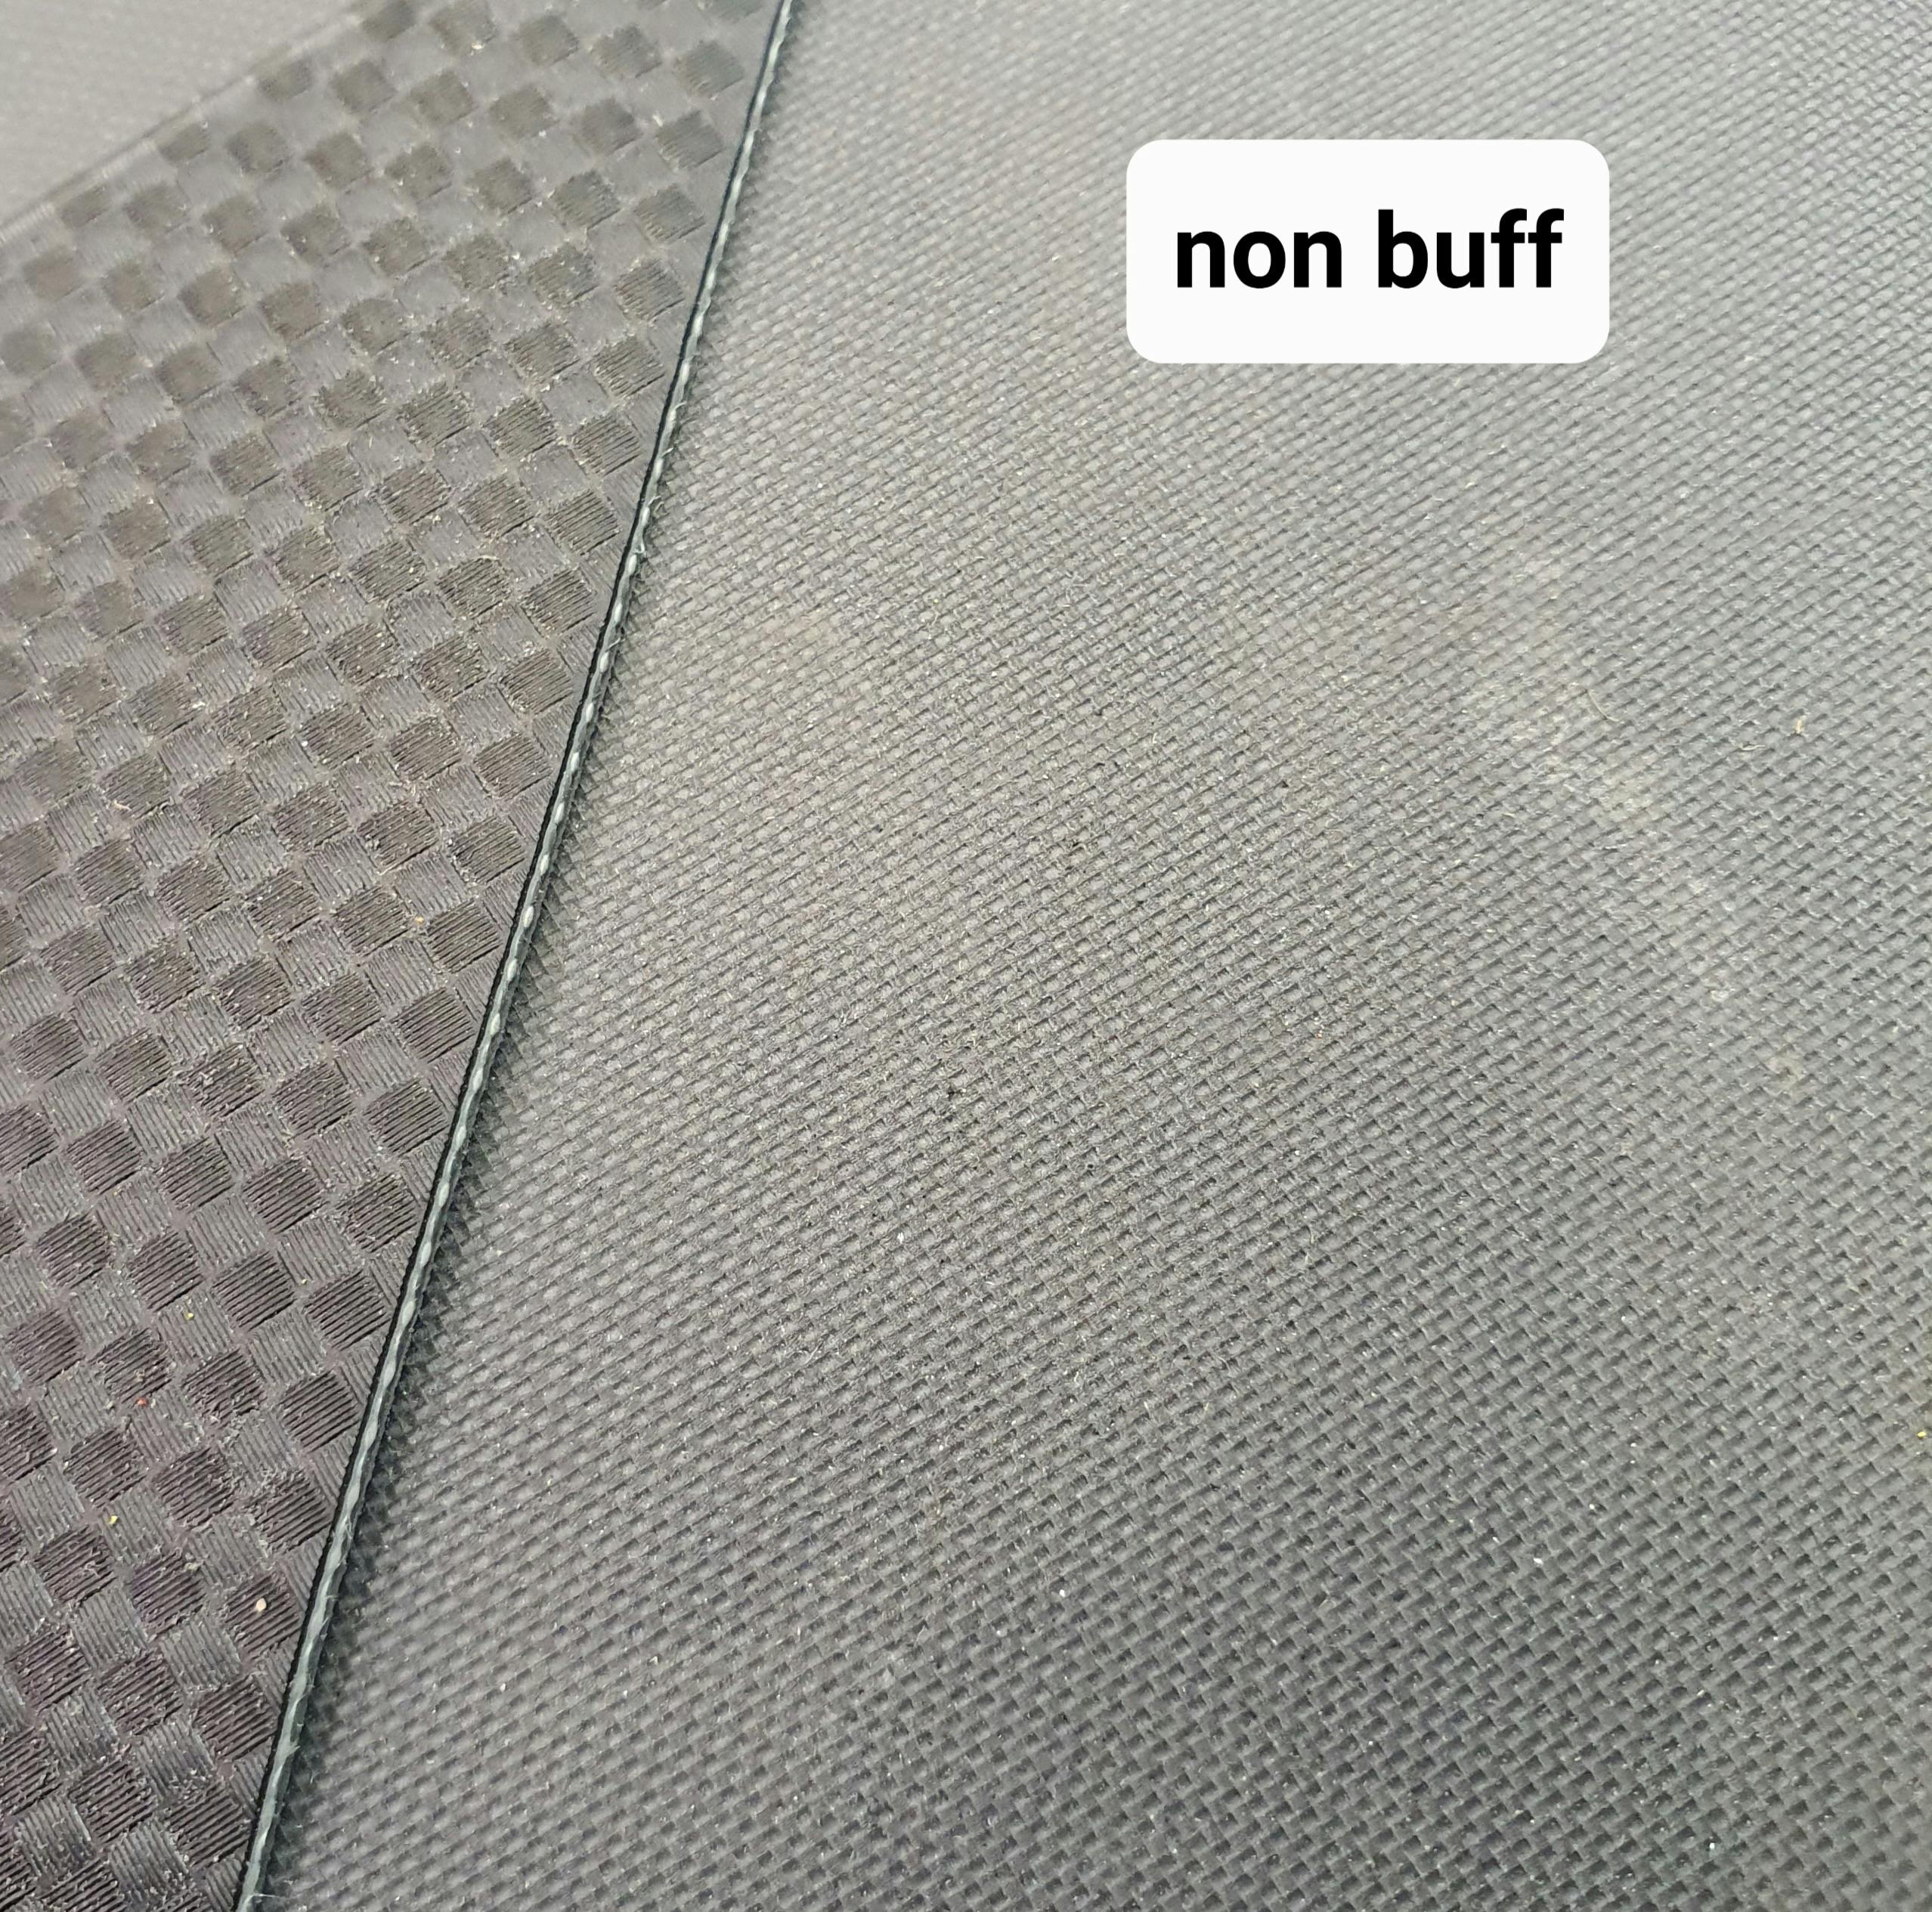 carbon fabric and non buff back